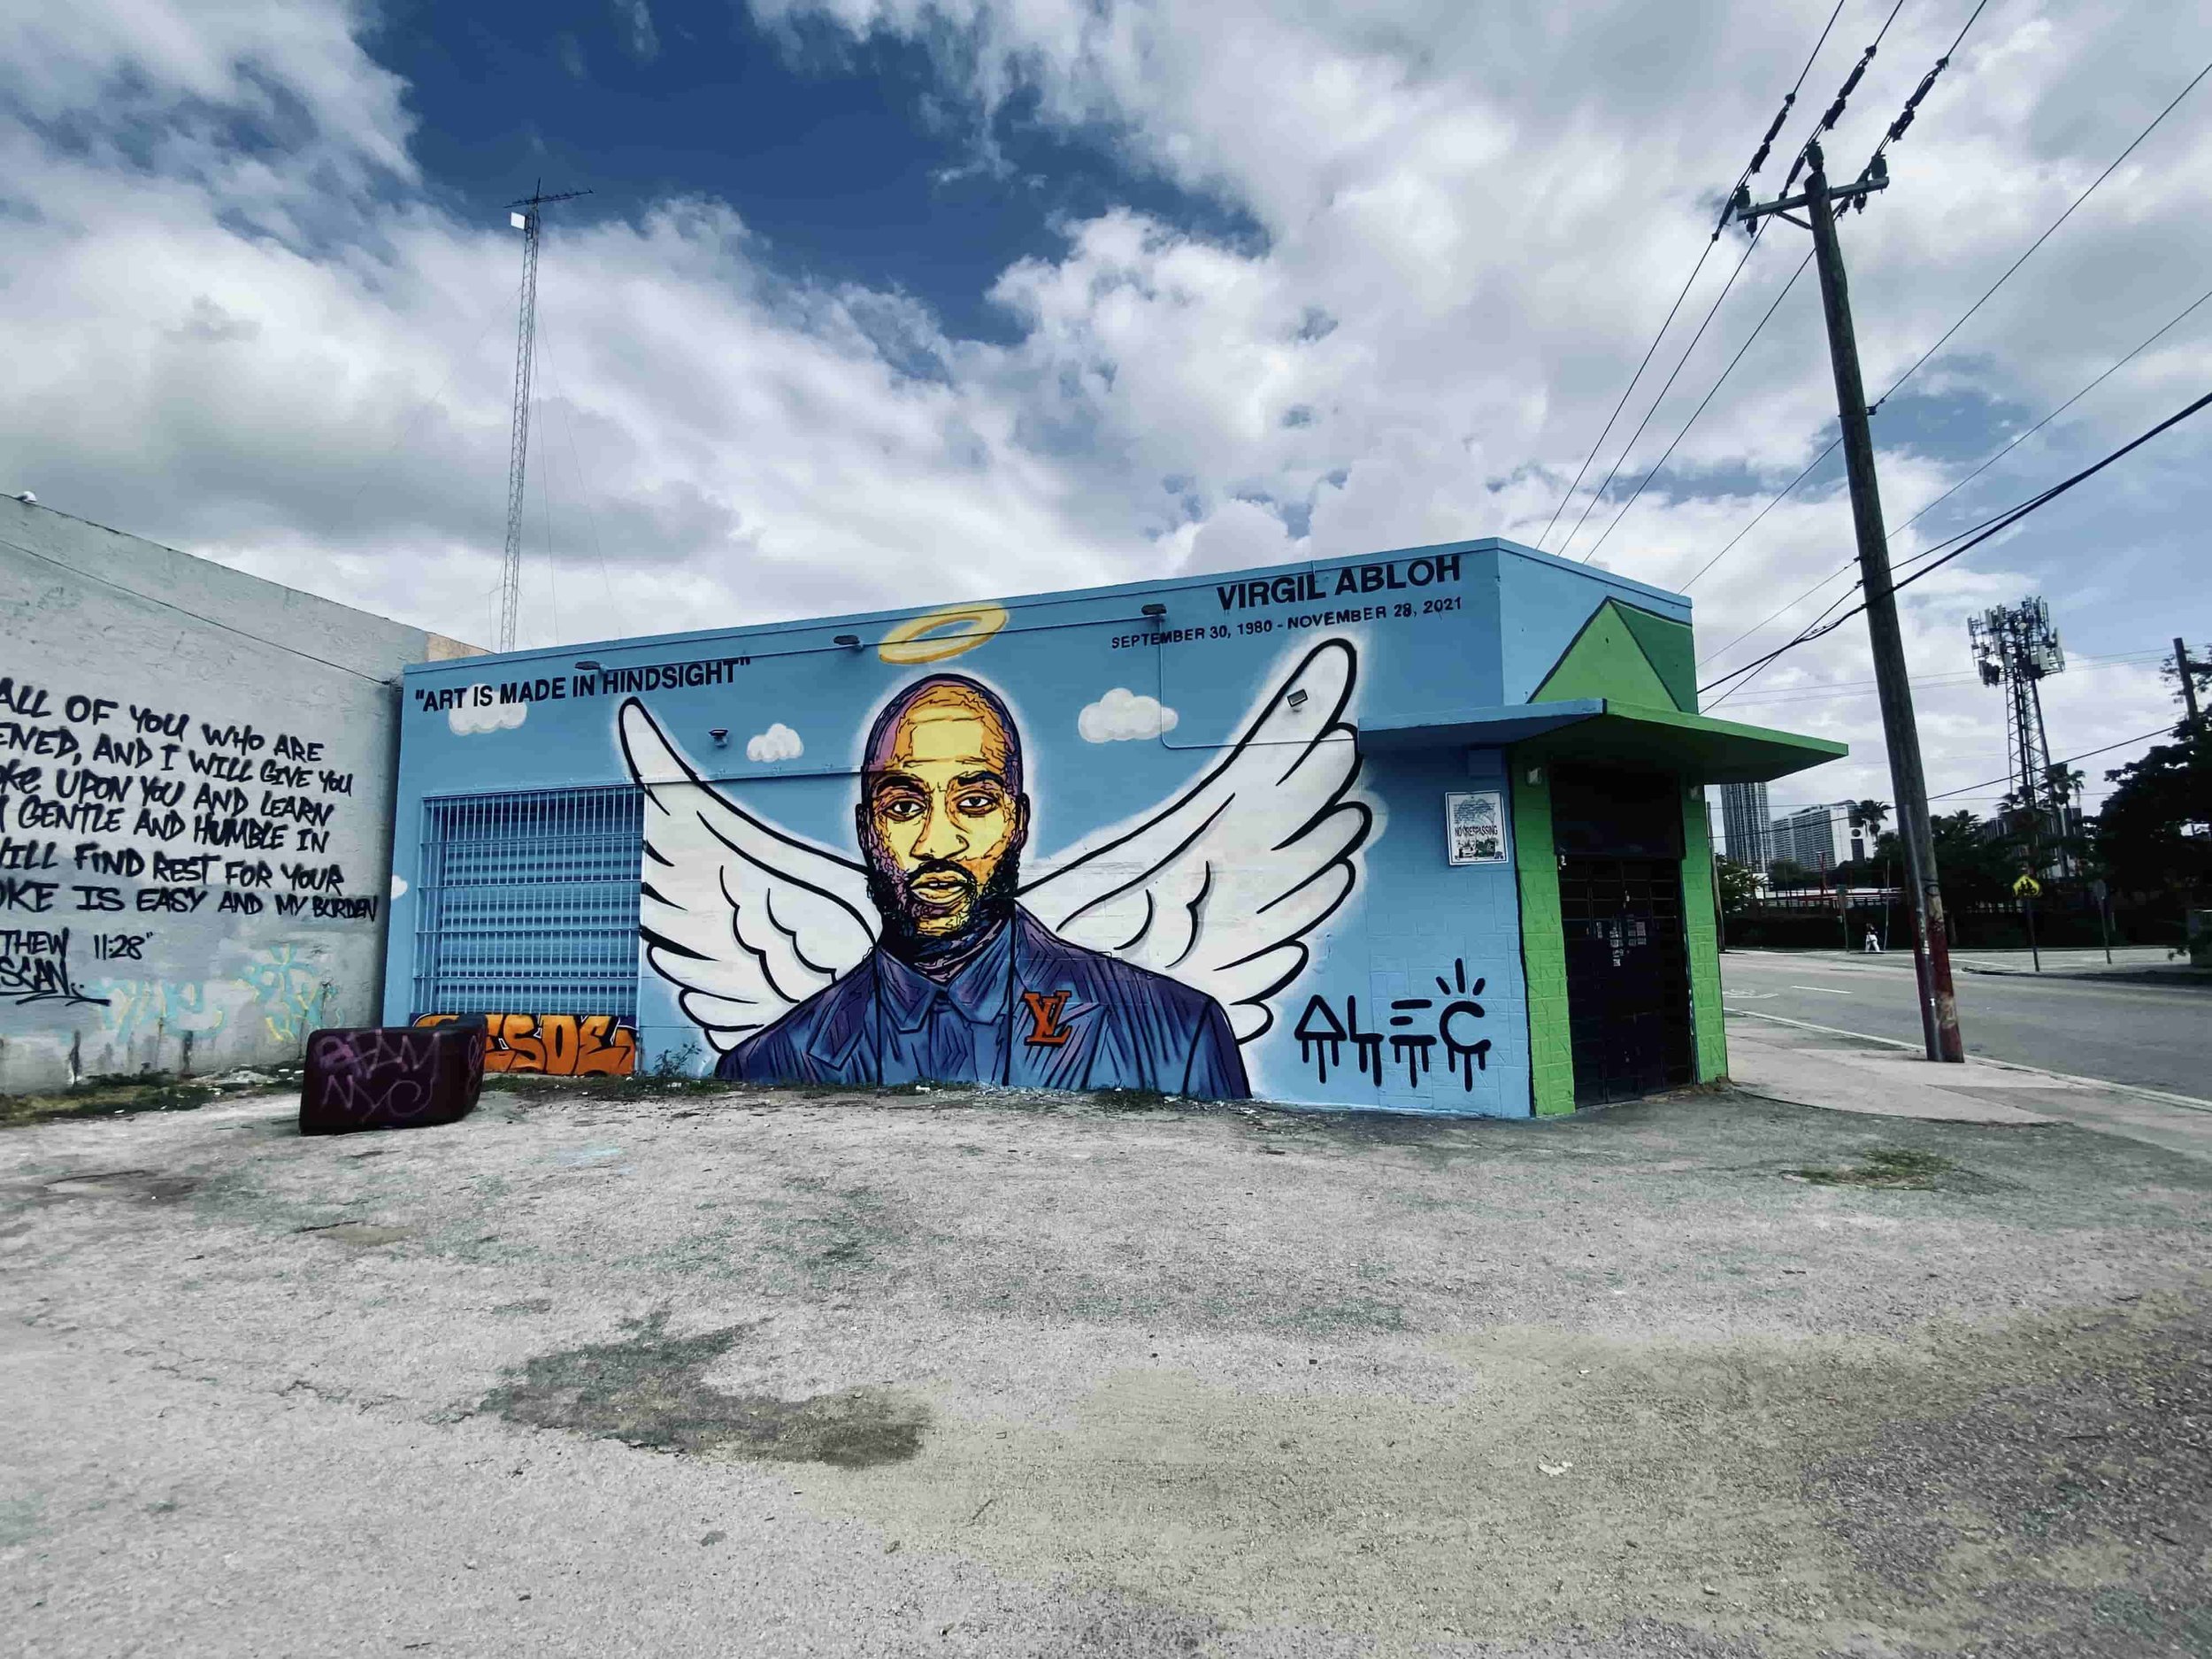 Alec Monopoly pays homage to Virgil Abloh with another mural in